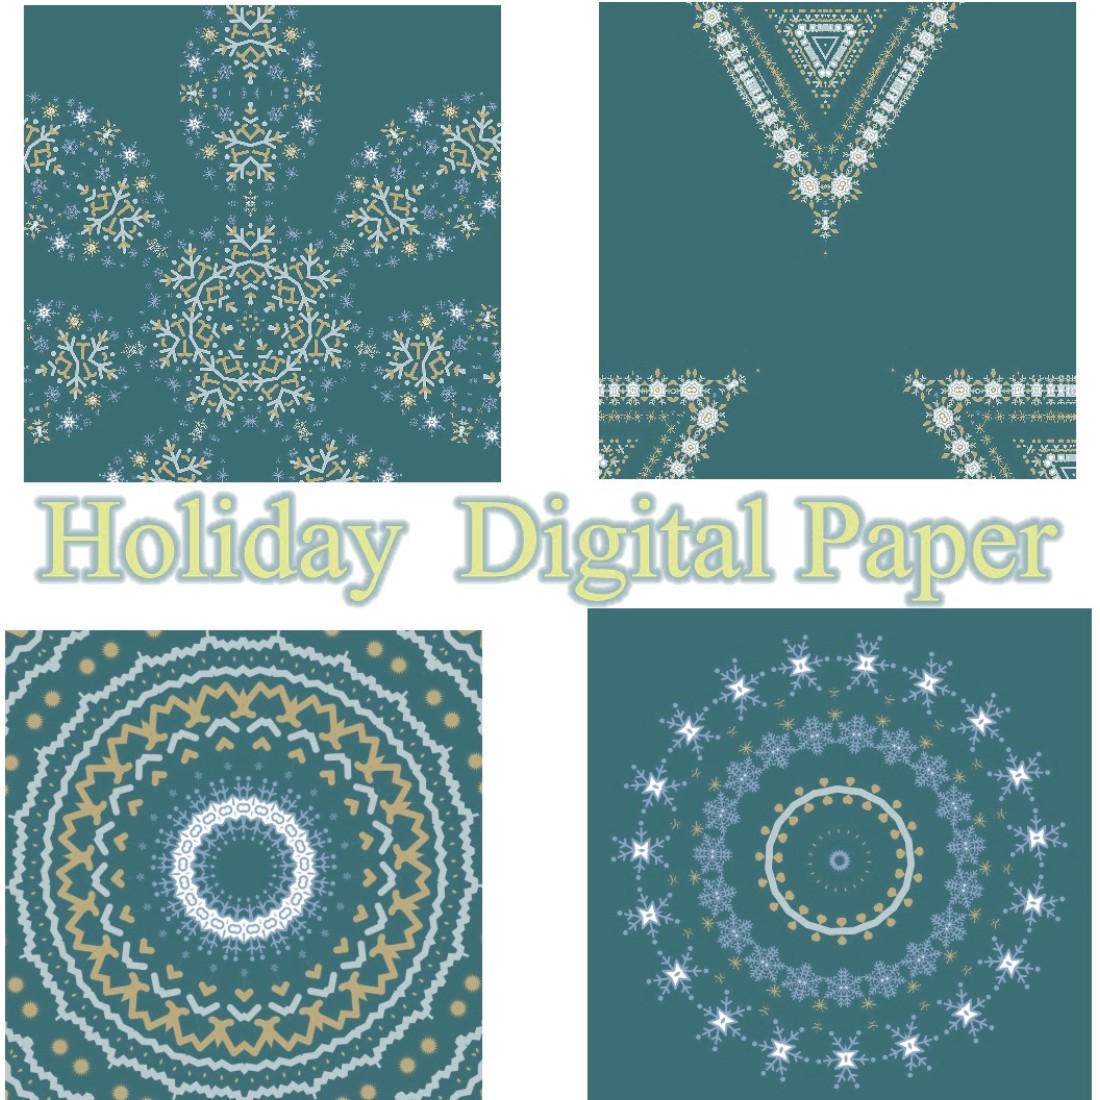 Smokey Teal Digital Paper Holiday Inspired JPG cover image.